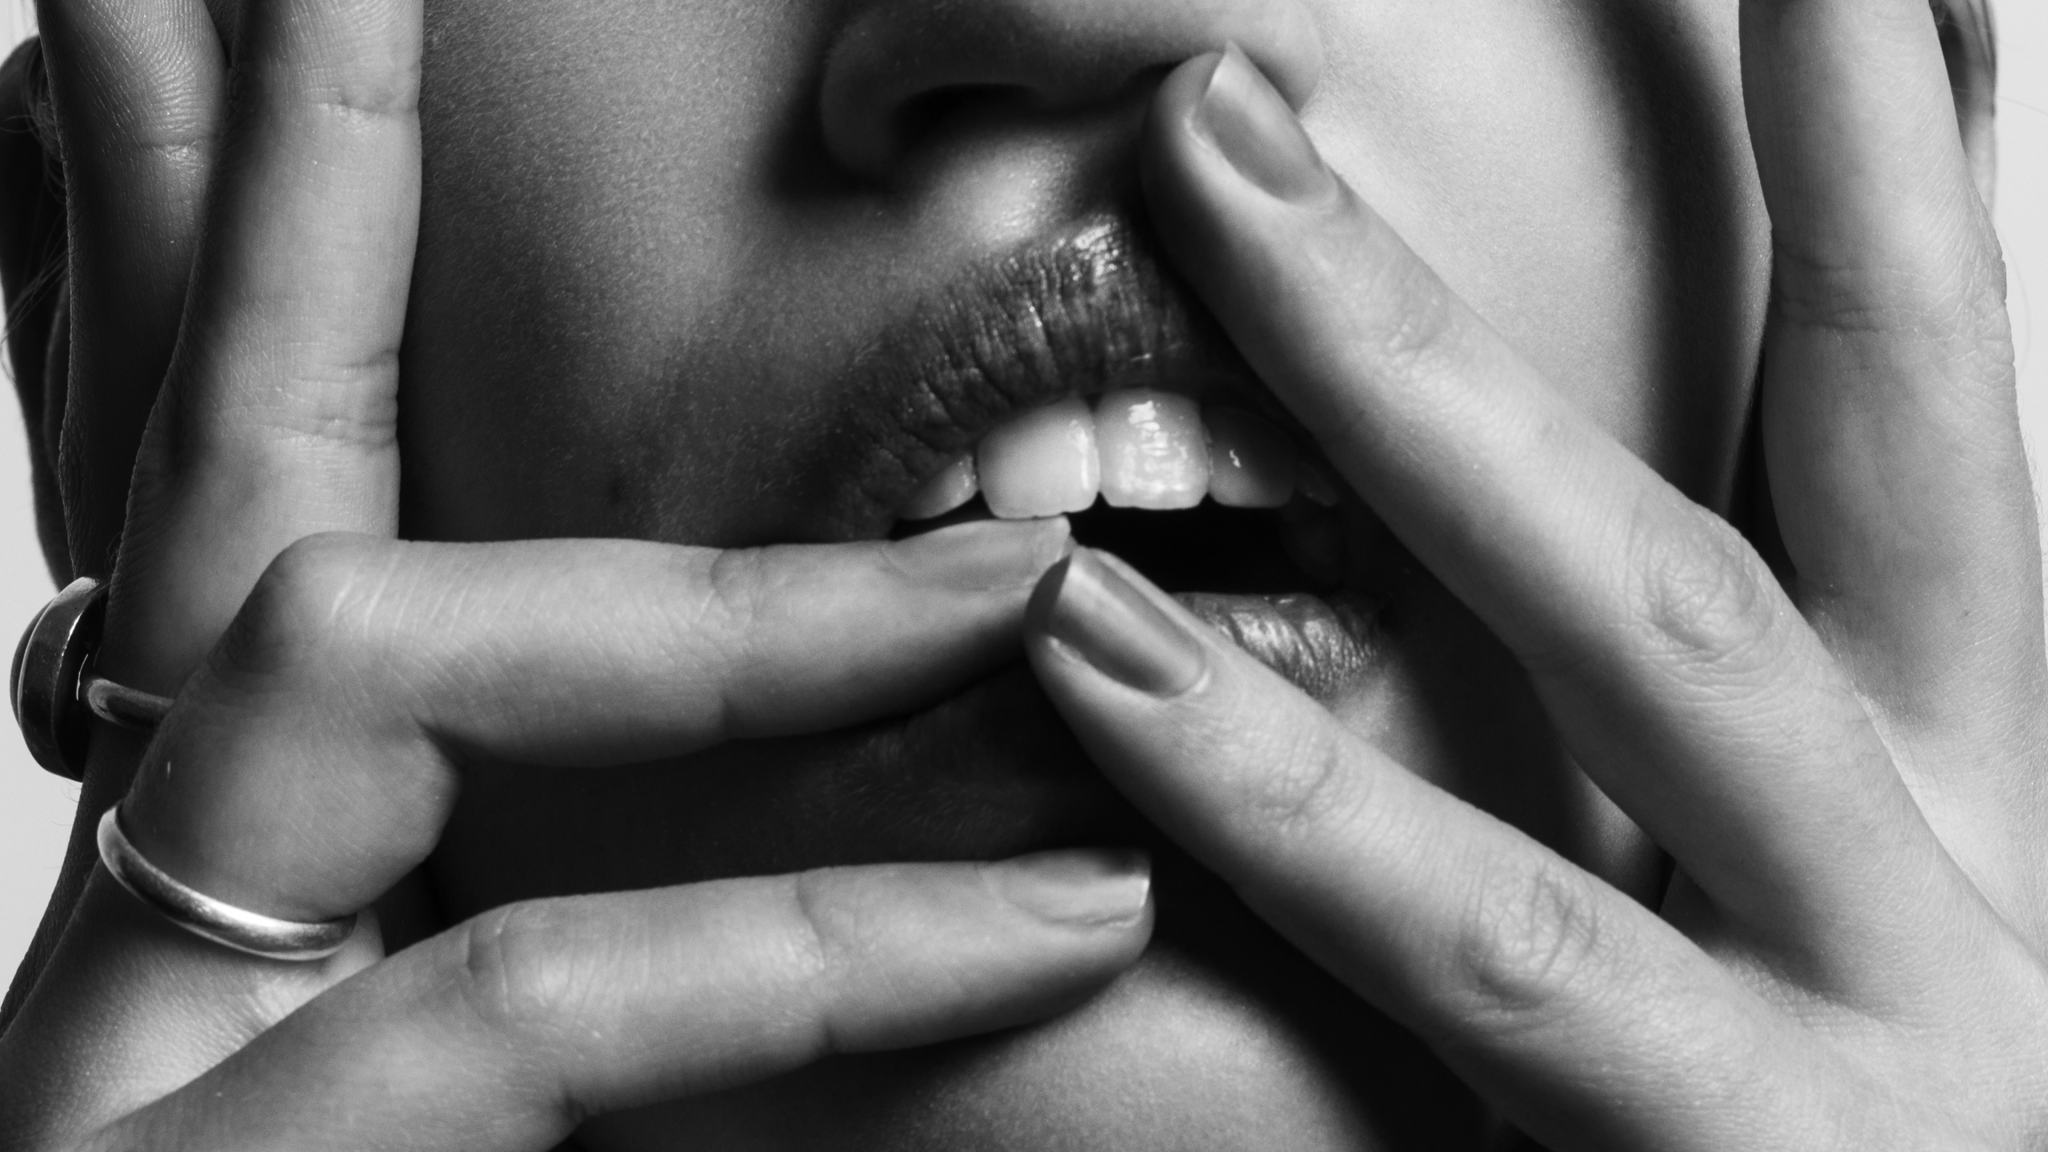 biting nails as a bad habit that is surprisingly good for you